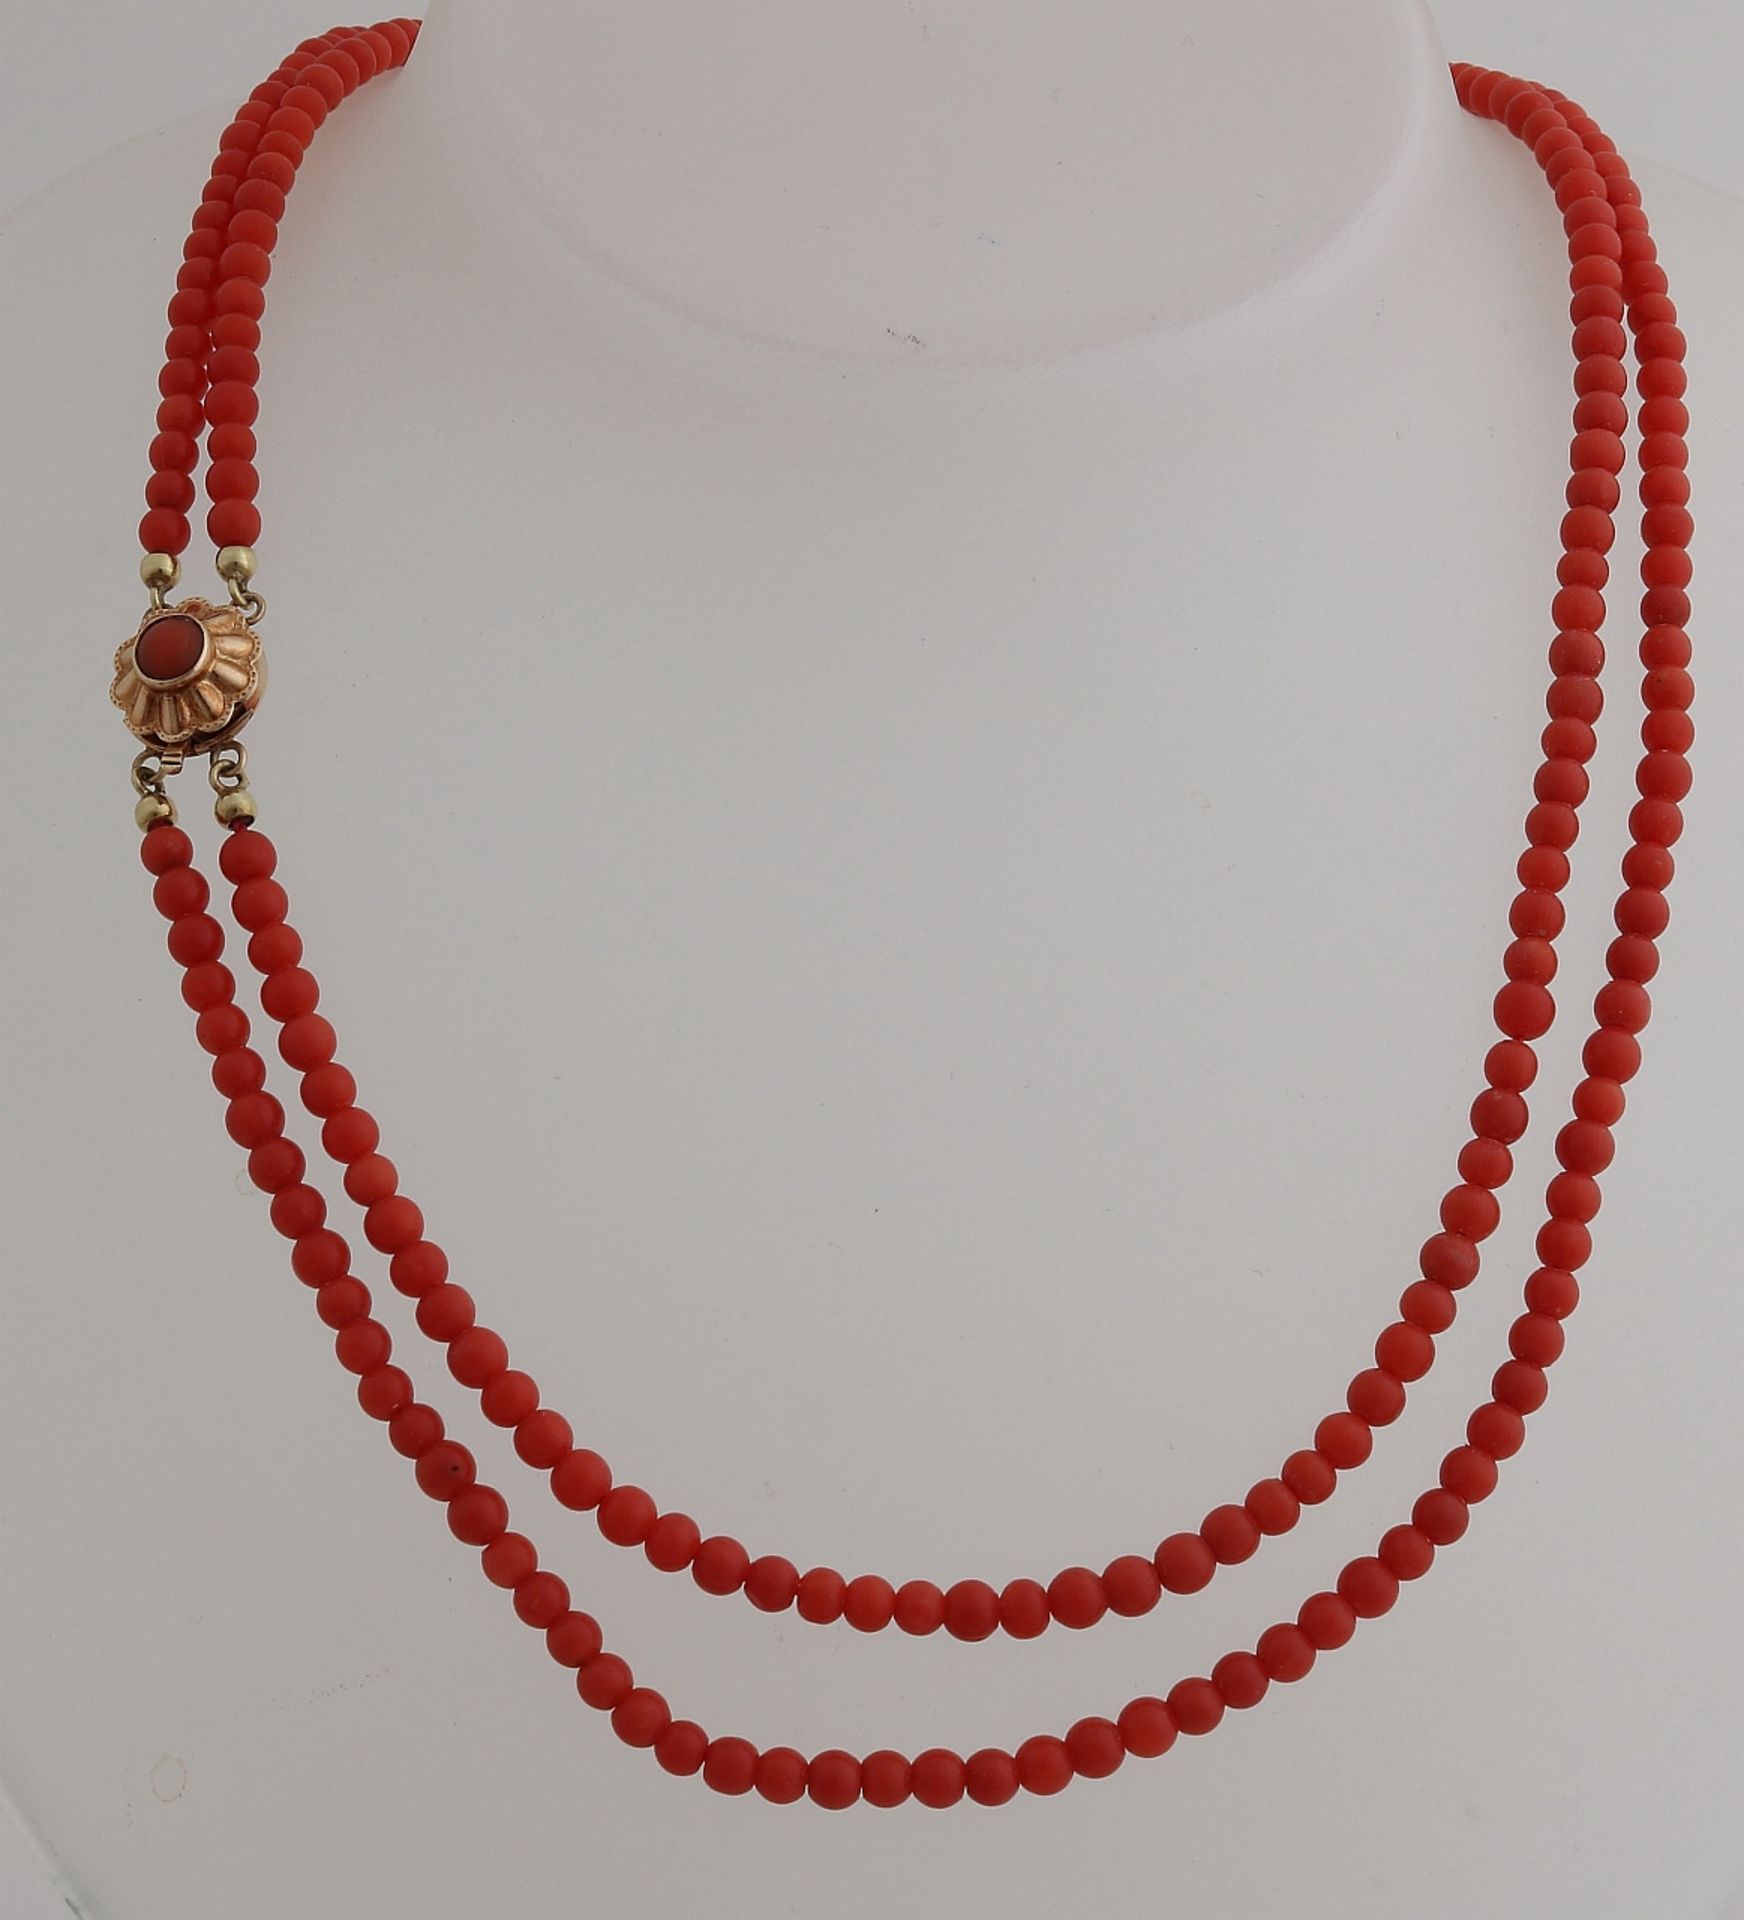 Necklace red coral with gold lock